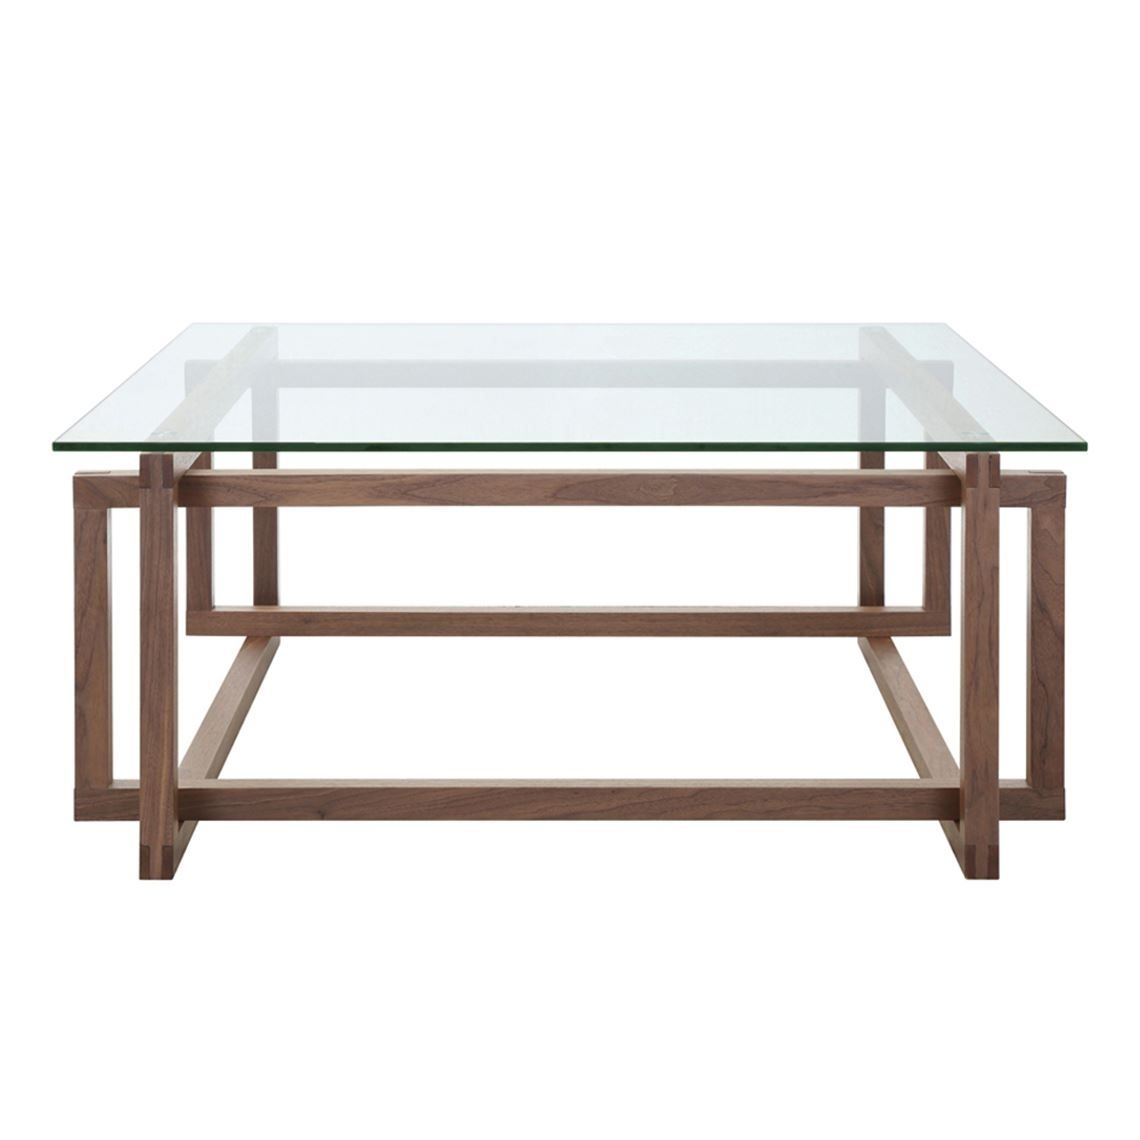 All Tables Online – Coffee Tables, Console Tables & Side Table – Freedom Regarding Stack Hi Gloss Wood Coffee Tables (View 30 of 30)